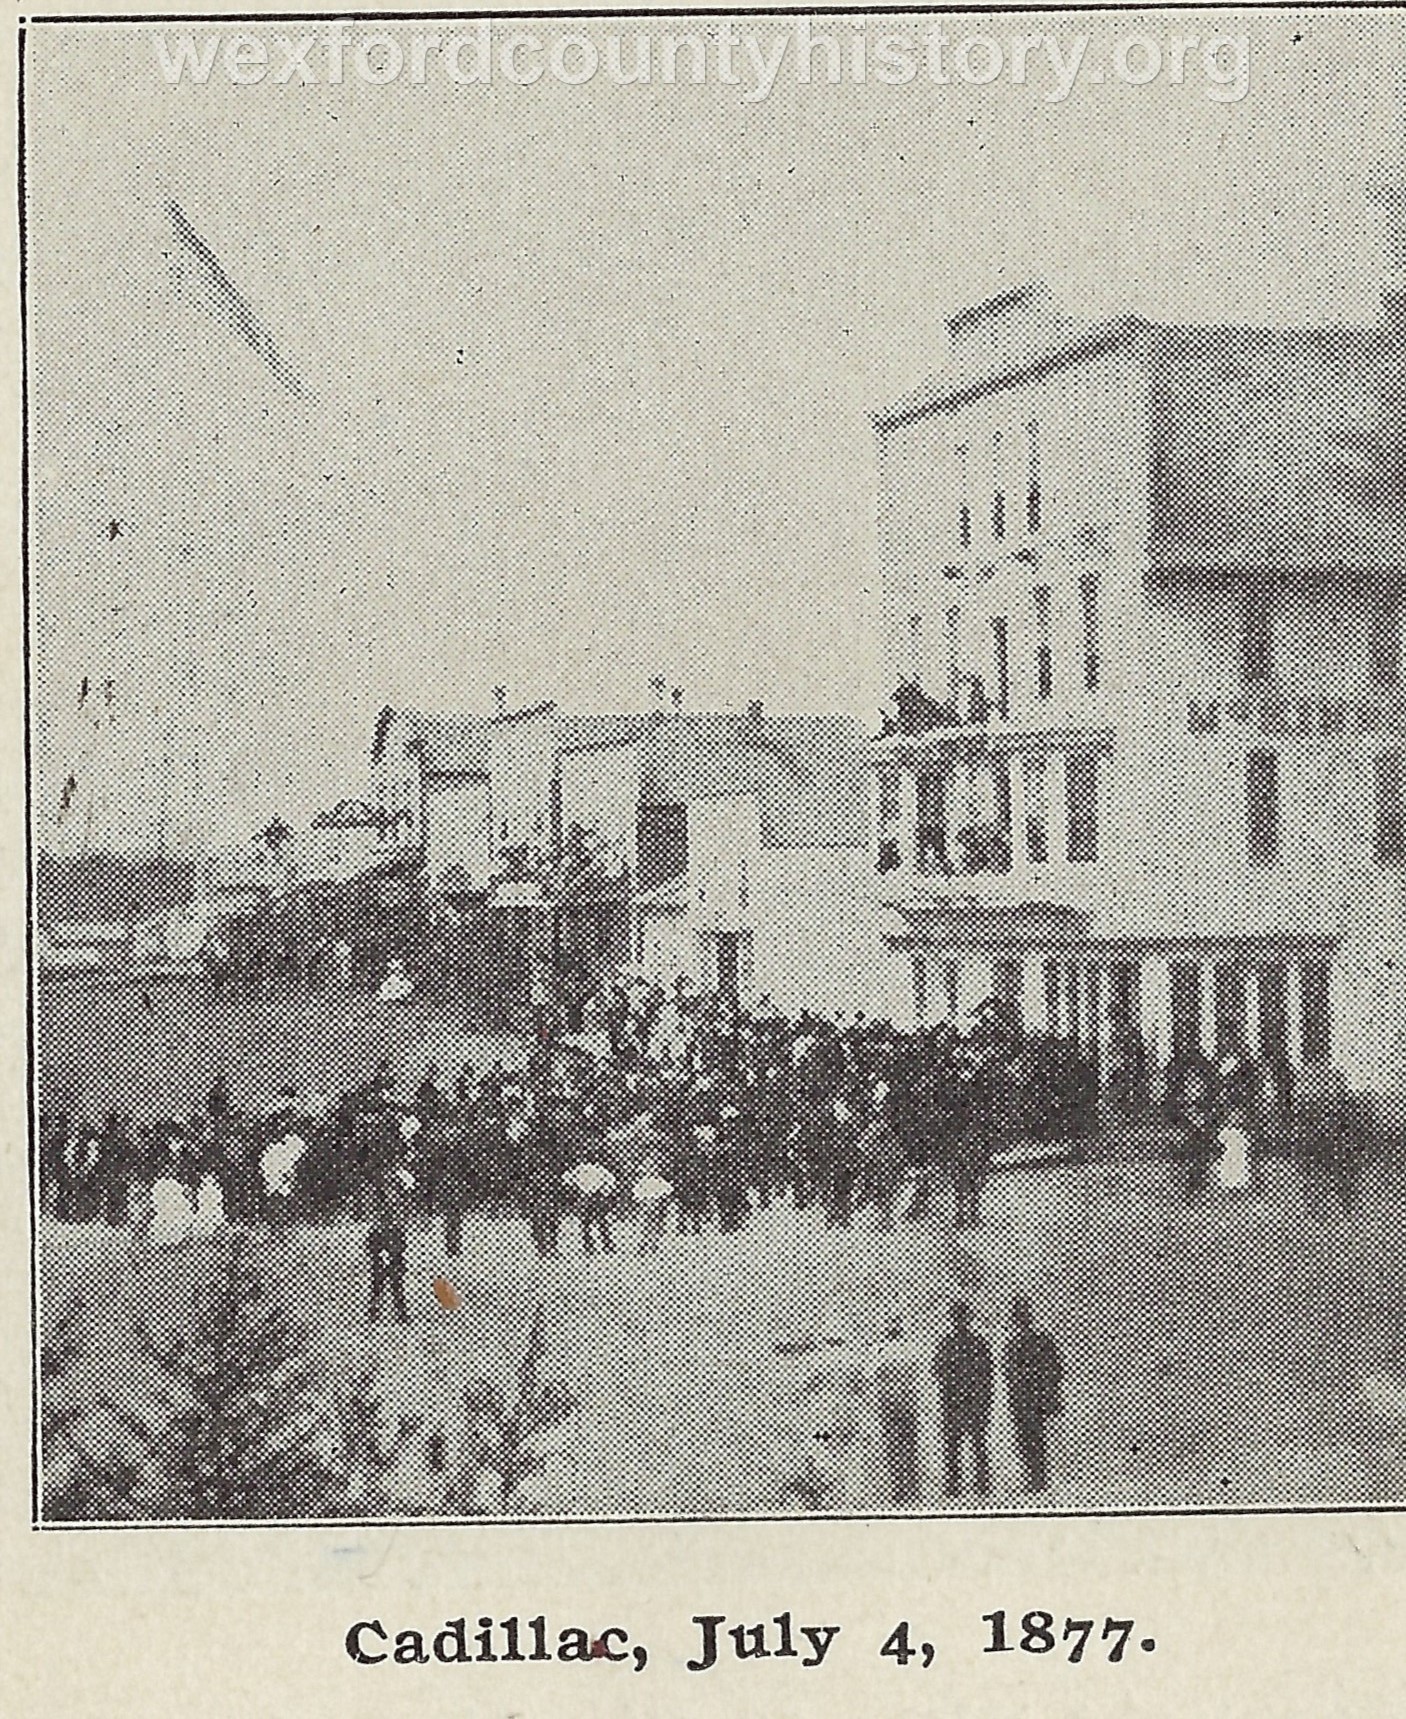 Cadillac-Parade-1877-07-04-Parade-in-front-of-McKinnon-Hotel-1